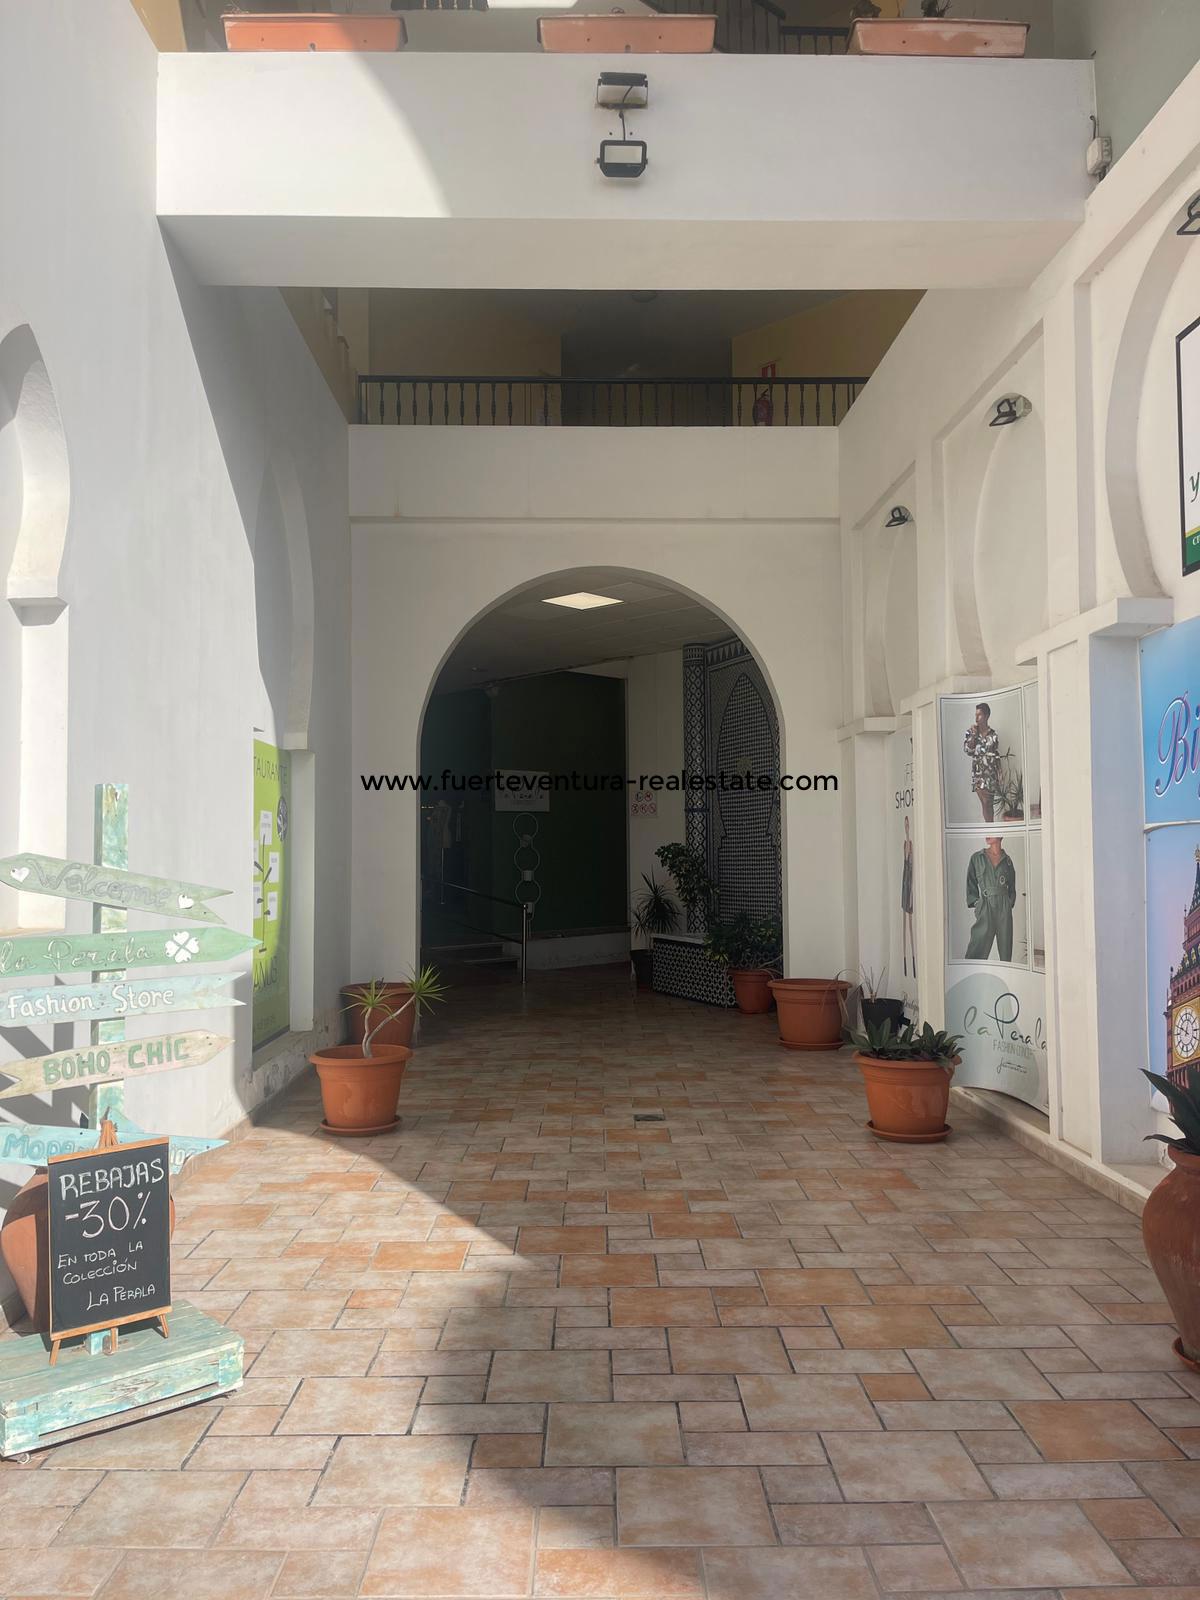  A shop in a very good commercial location in Corralejo is being rented